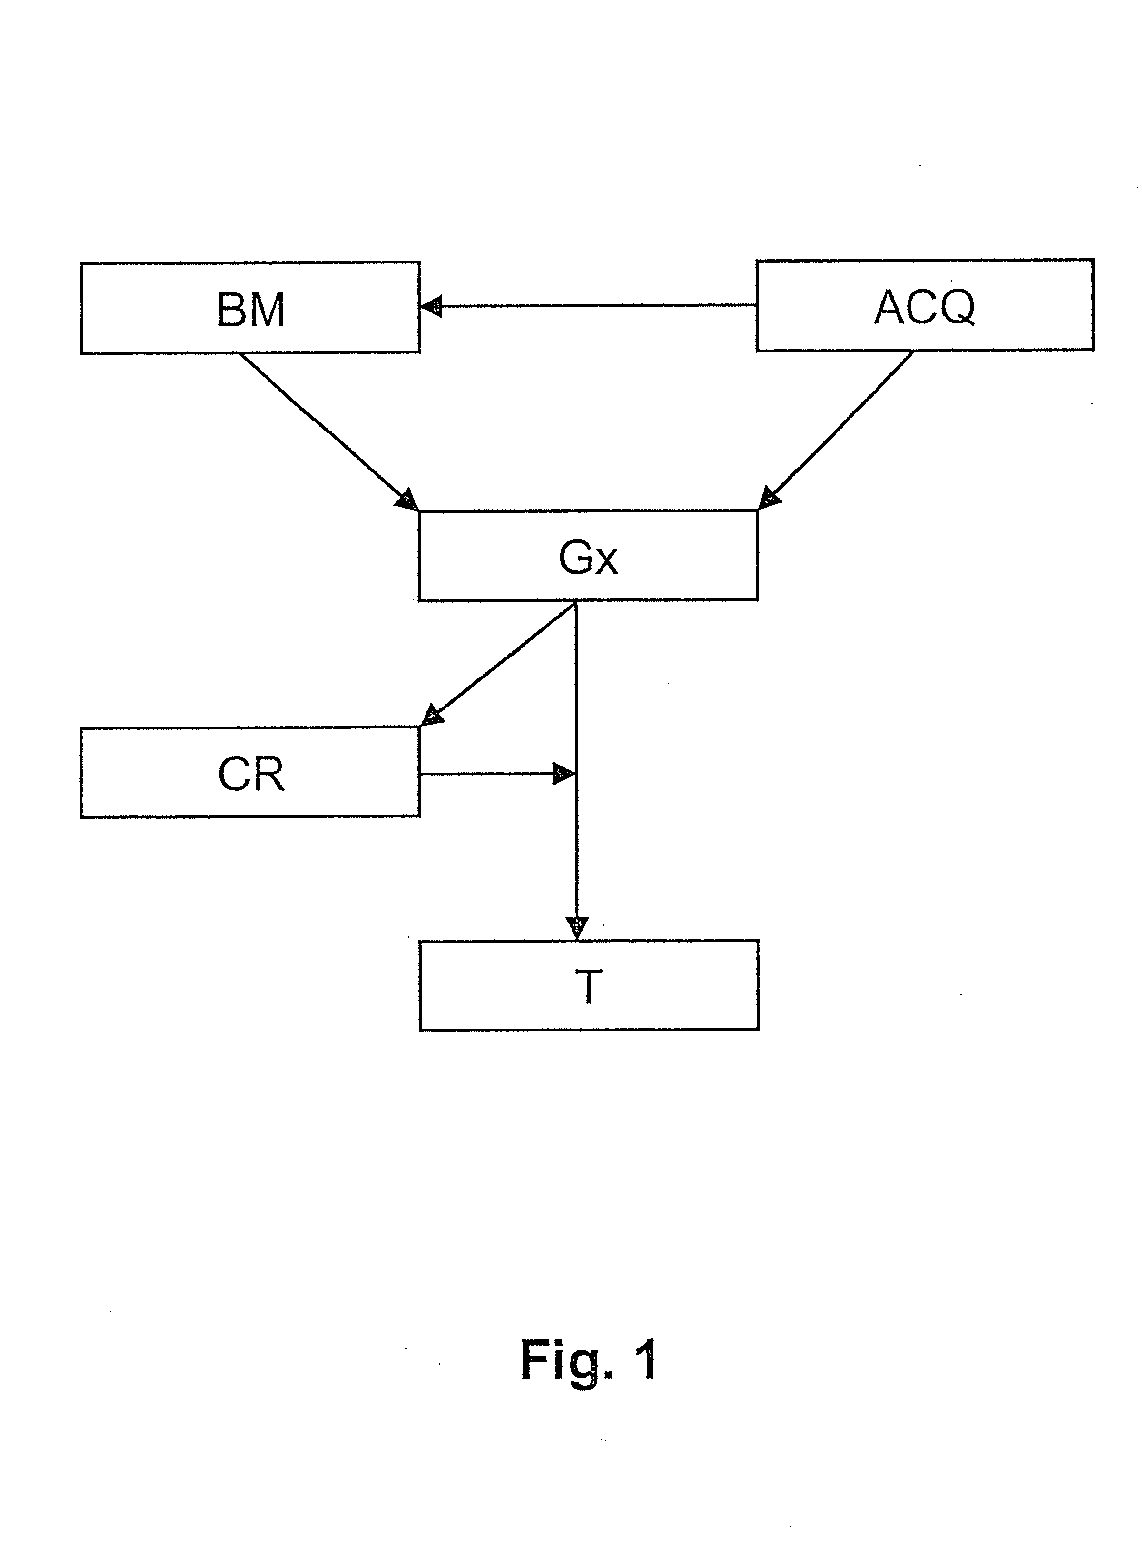 Method of evaluating and selecting an enhanced oil recovery strategy for fractured reservoirs